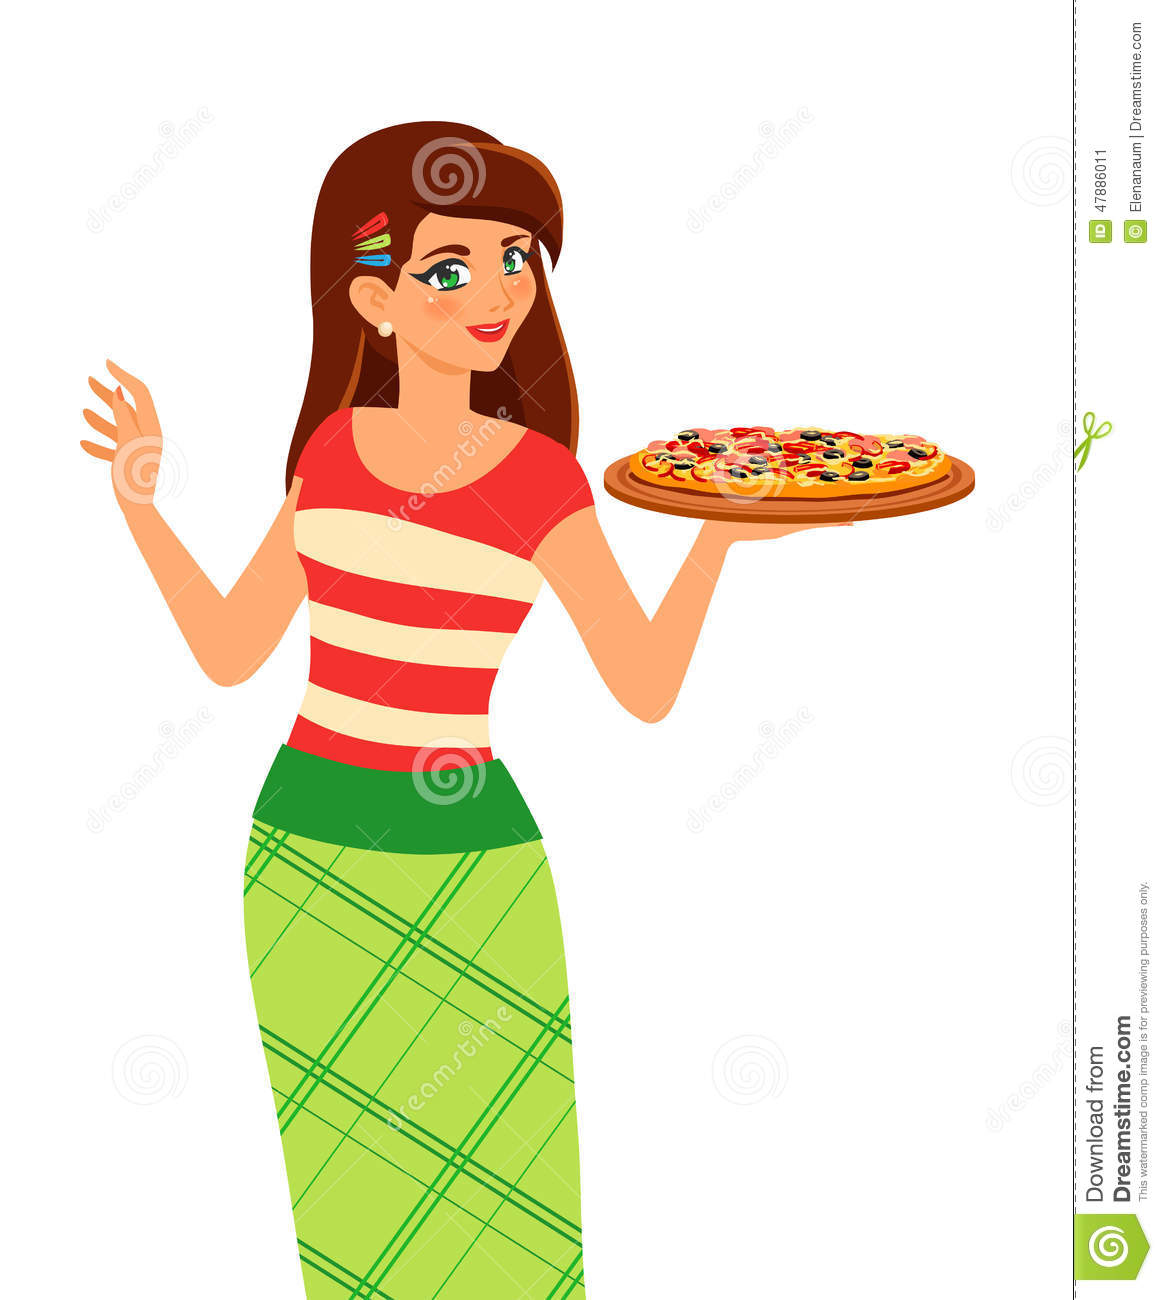 Showing post & media for Cartoon women pizza.